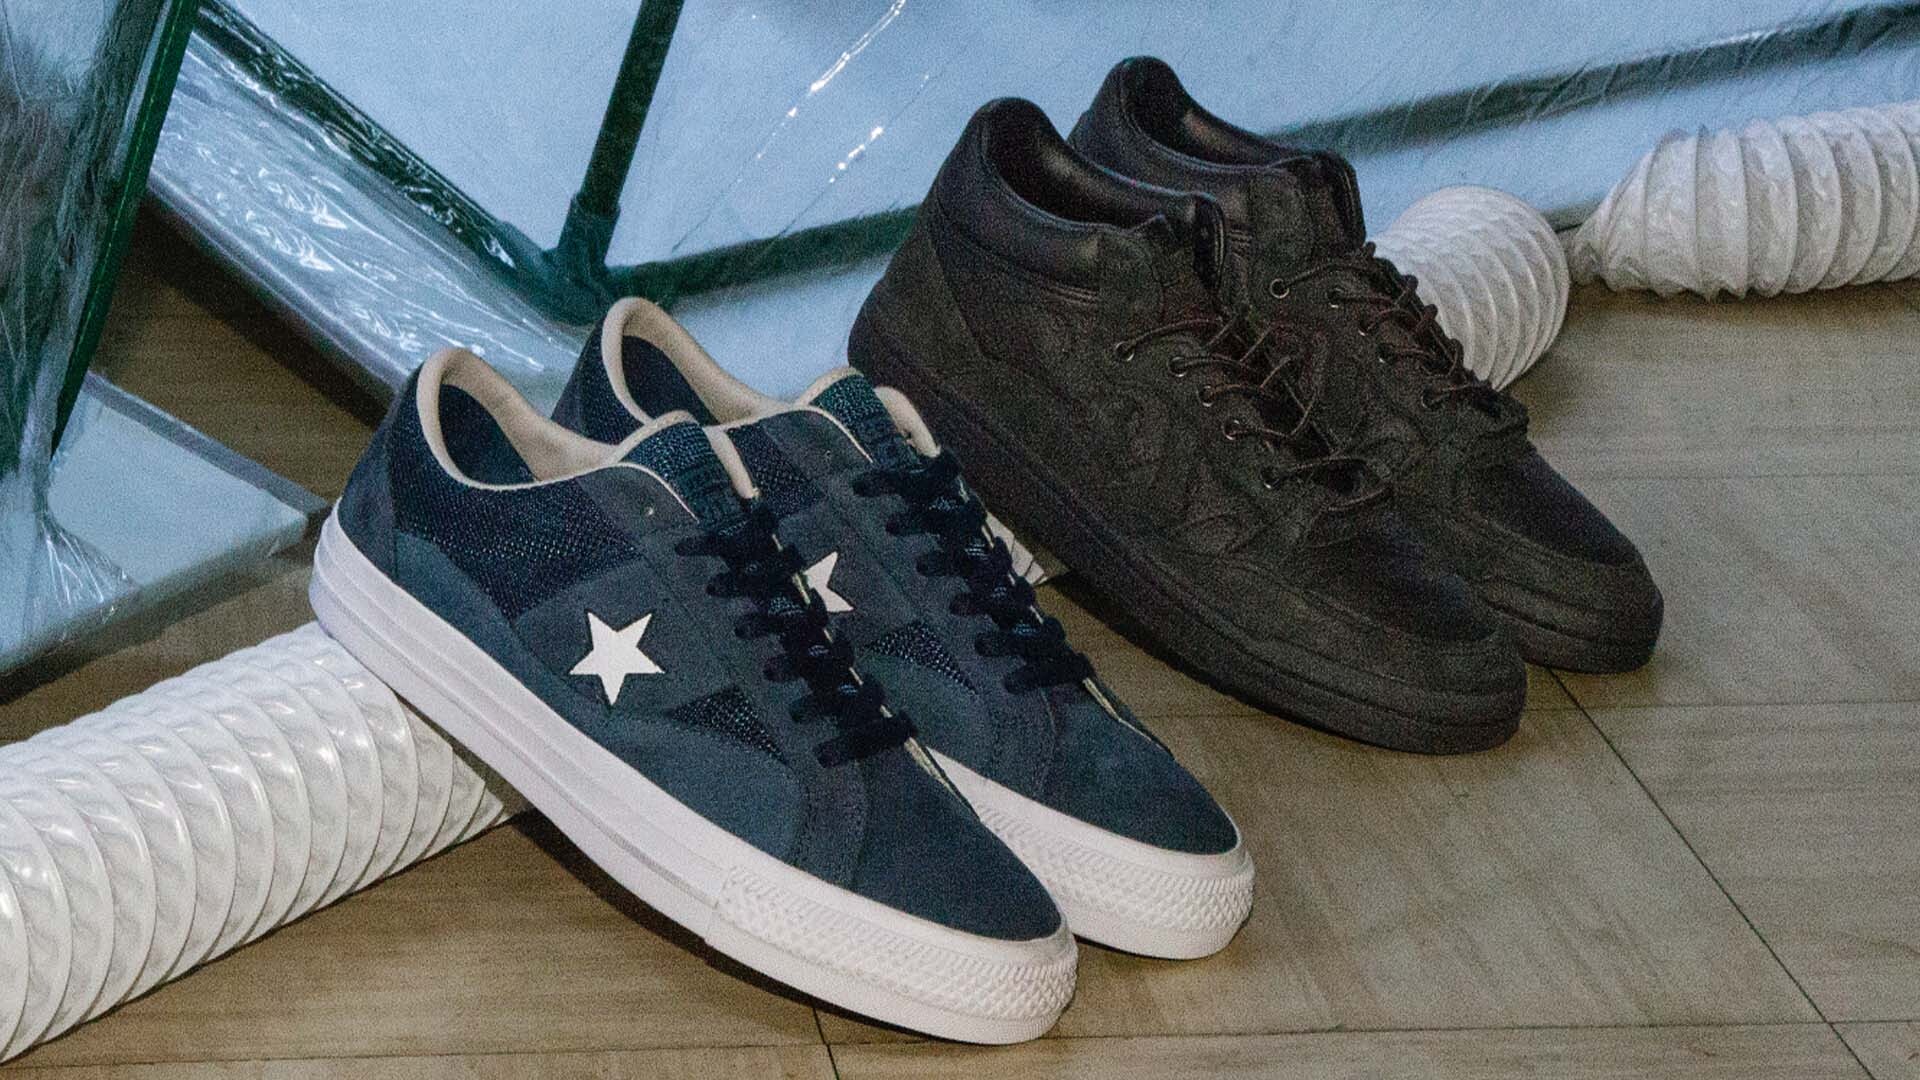 Alltimers and Converse Skate Collaboration